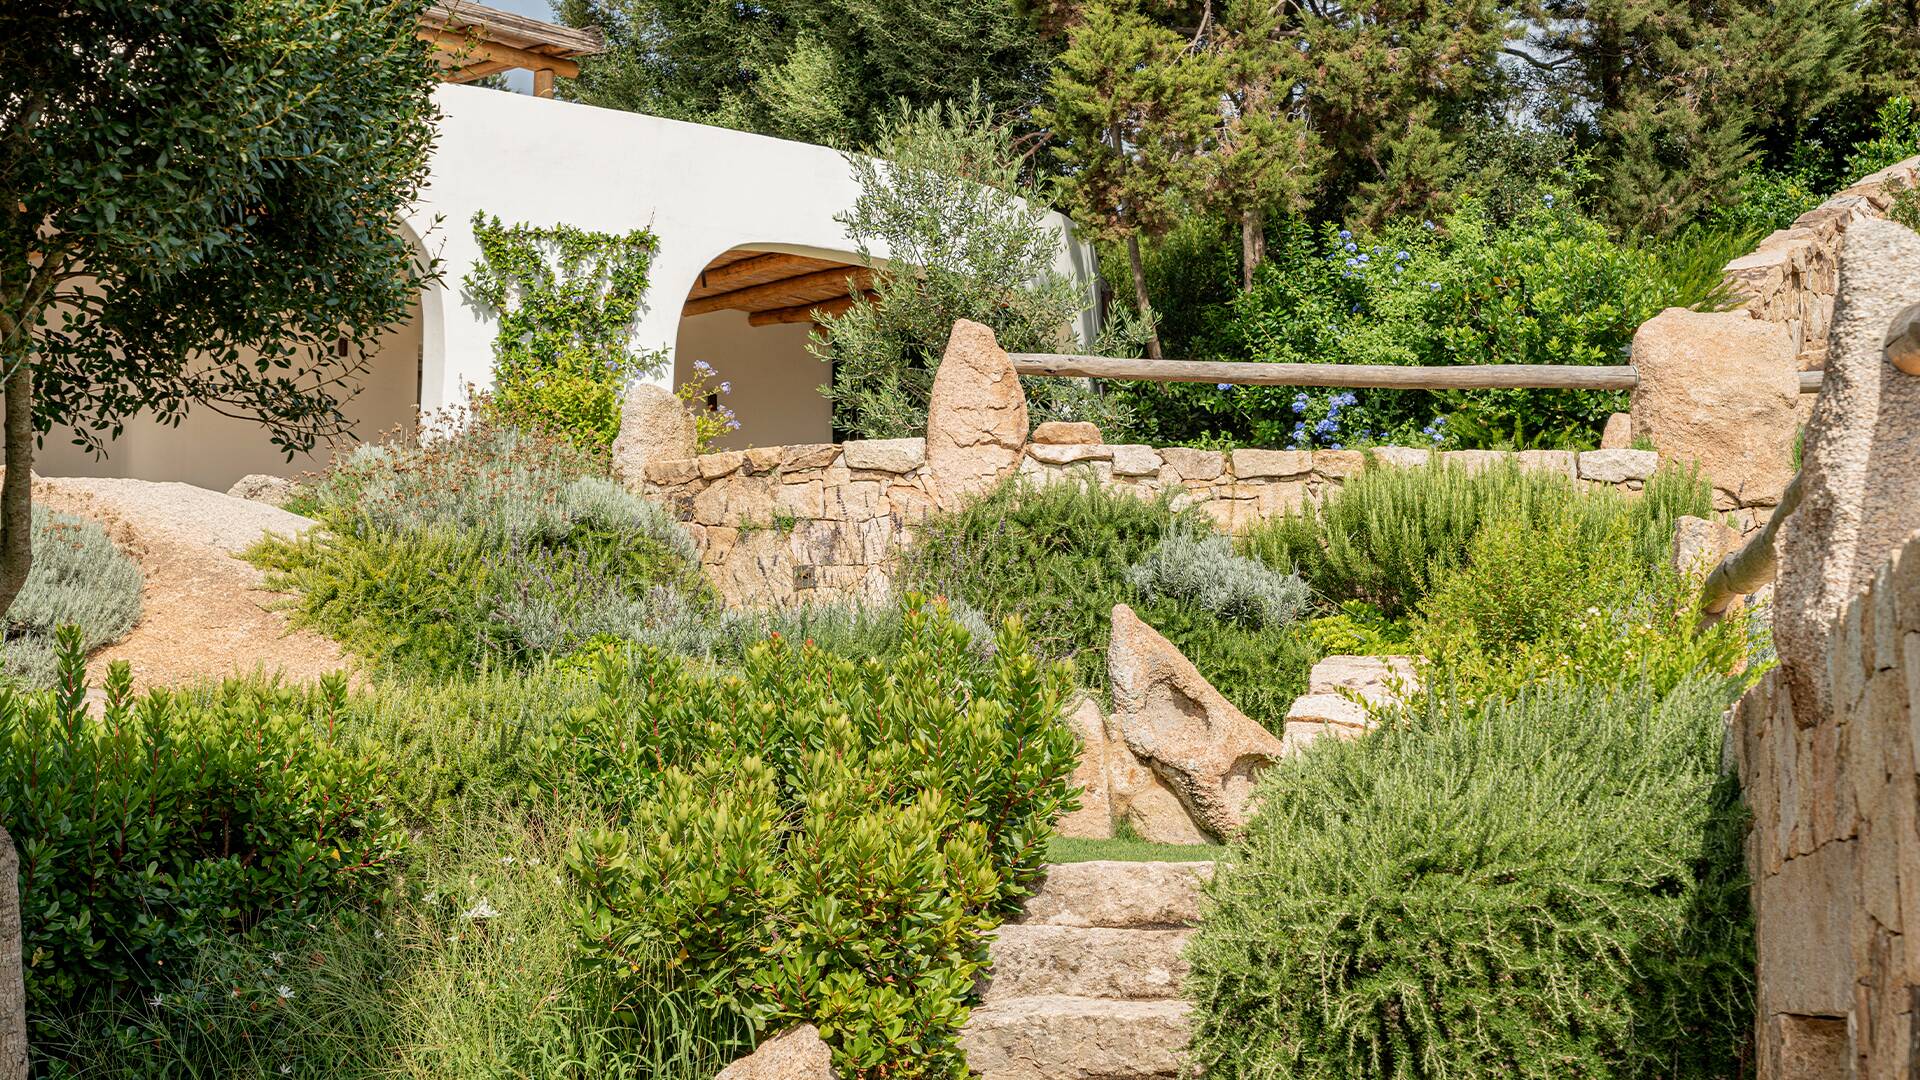 private garden with Sardinian granitic rocks